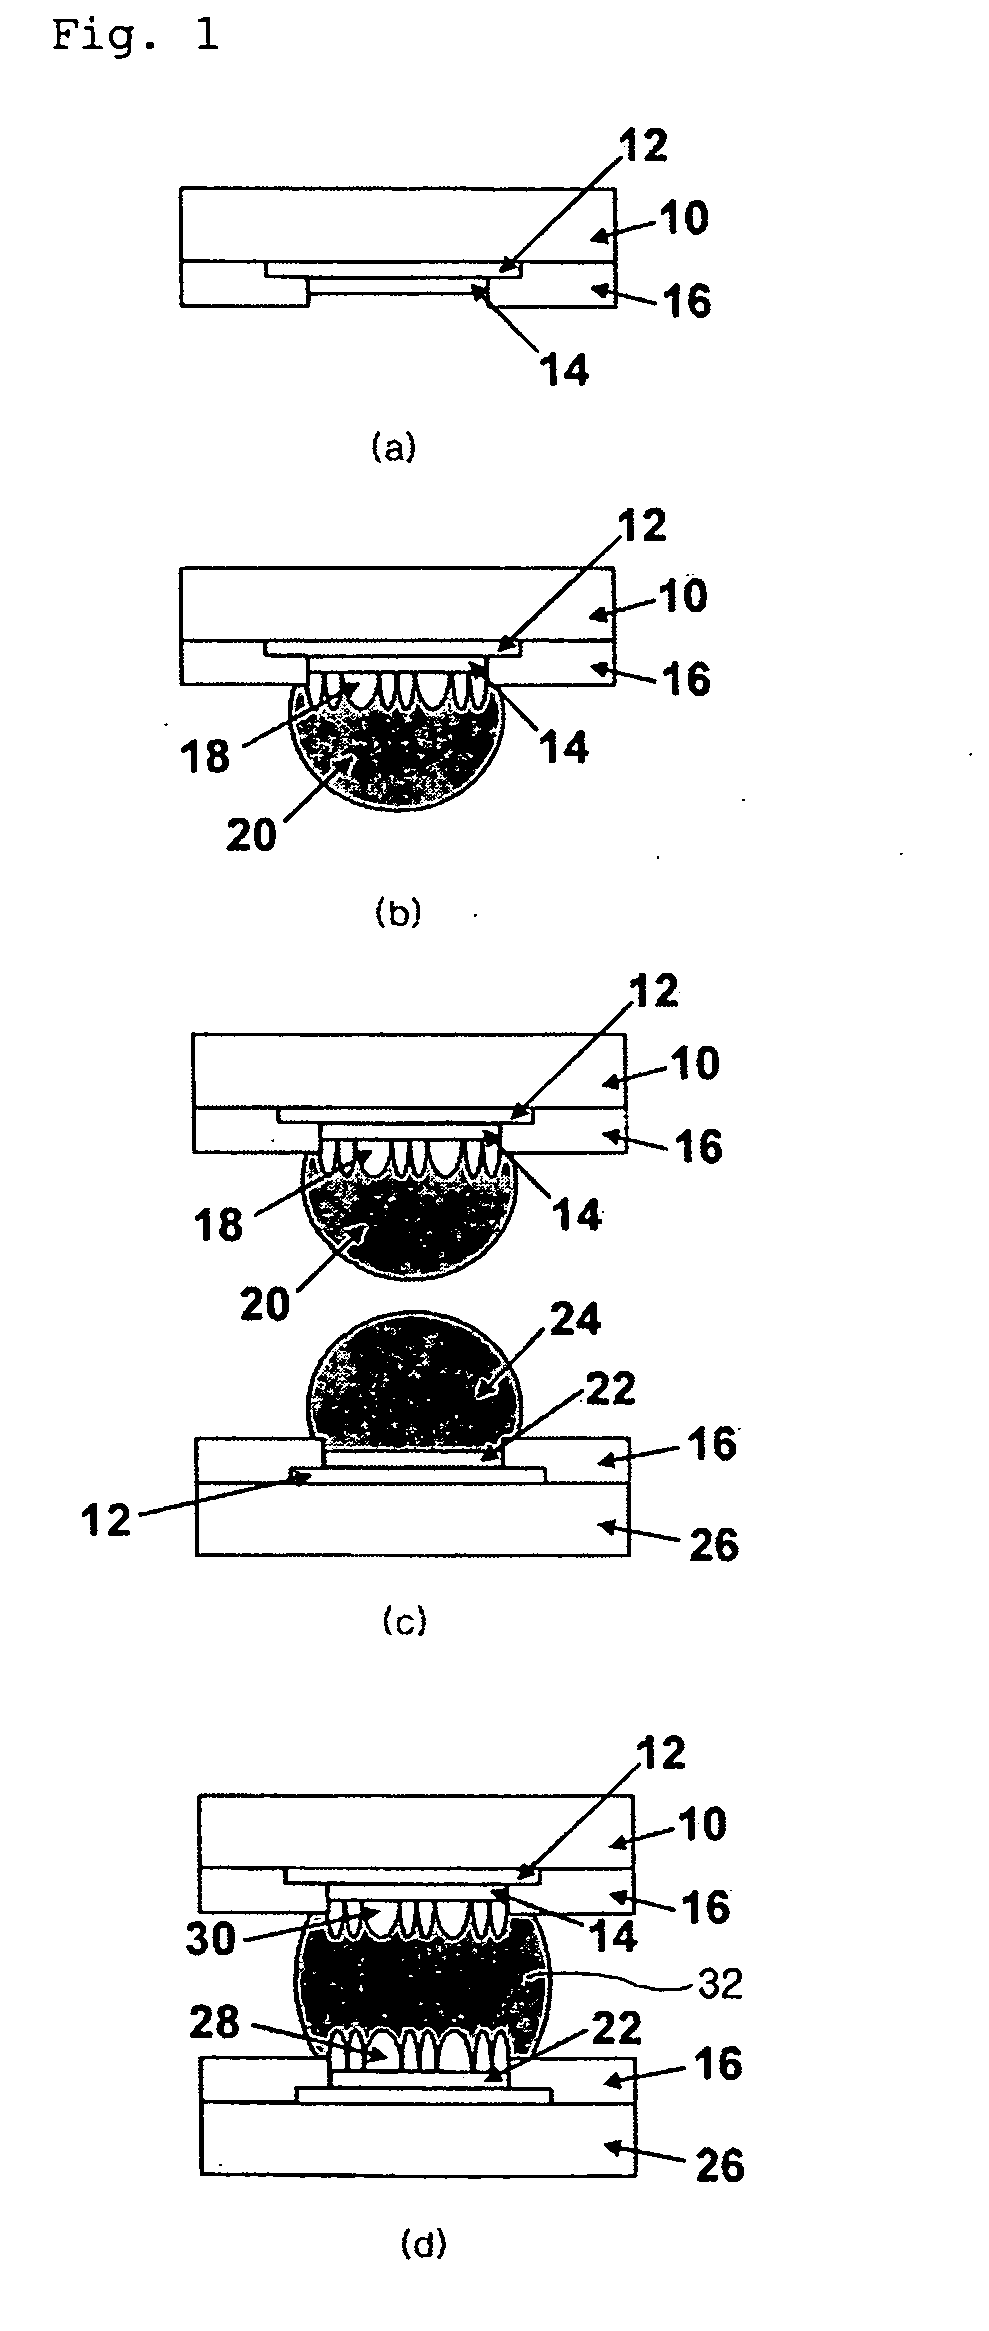 Method for joining electronic parts finished with nickel and electronic parts finished with electroless nickel